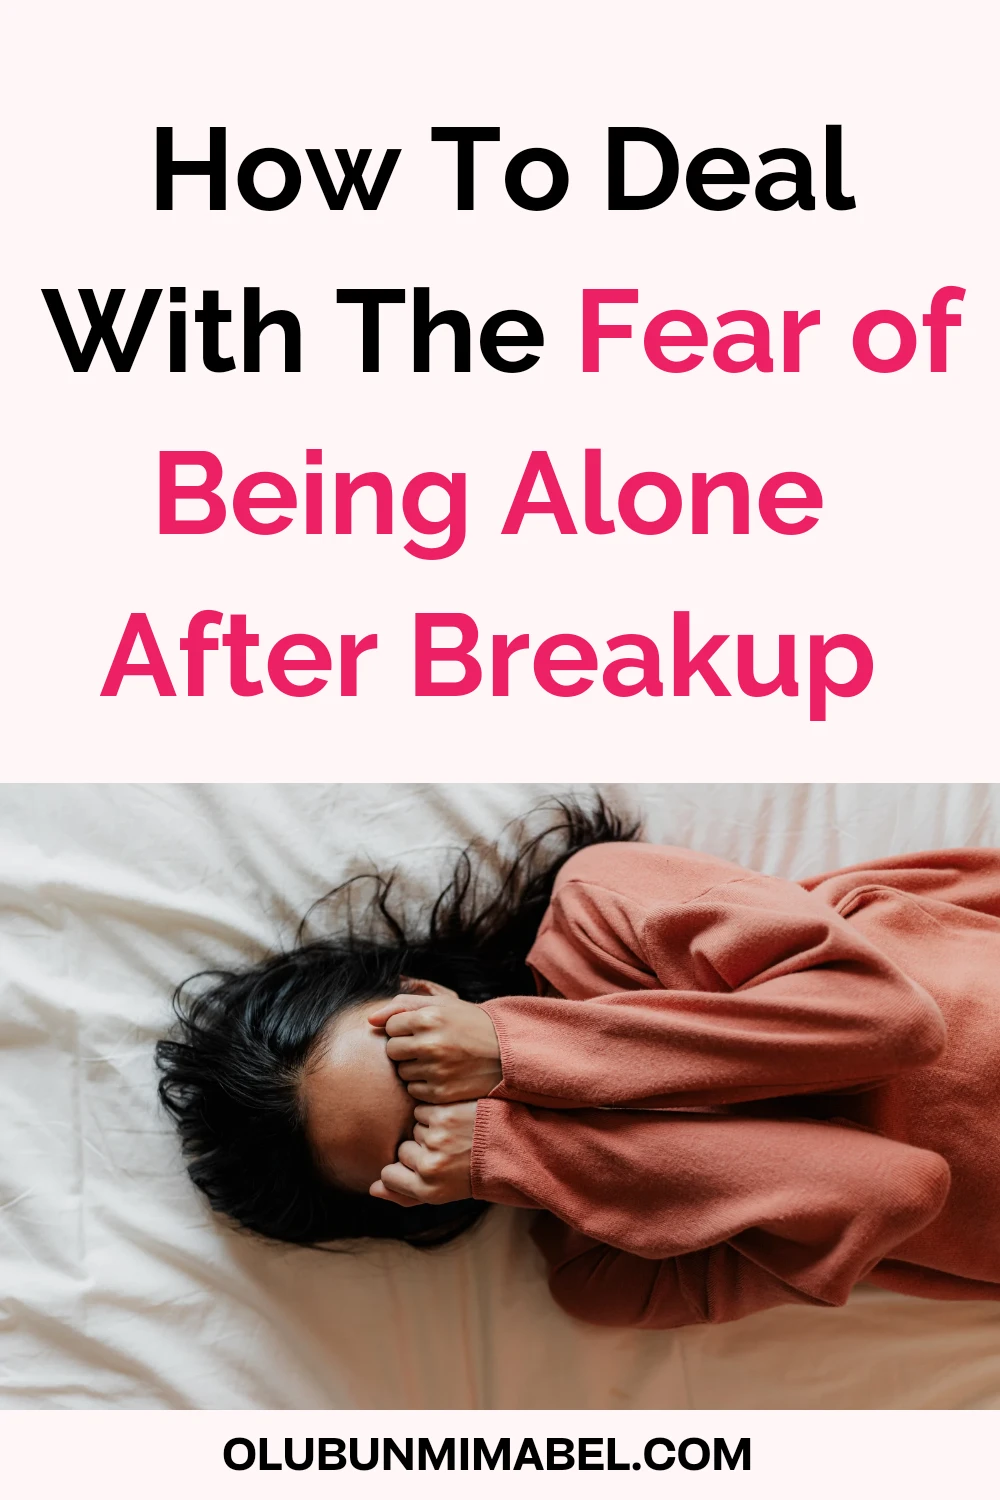 Fear of Being Alone After Breakup